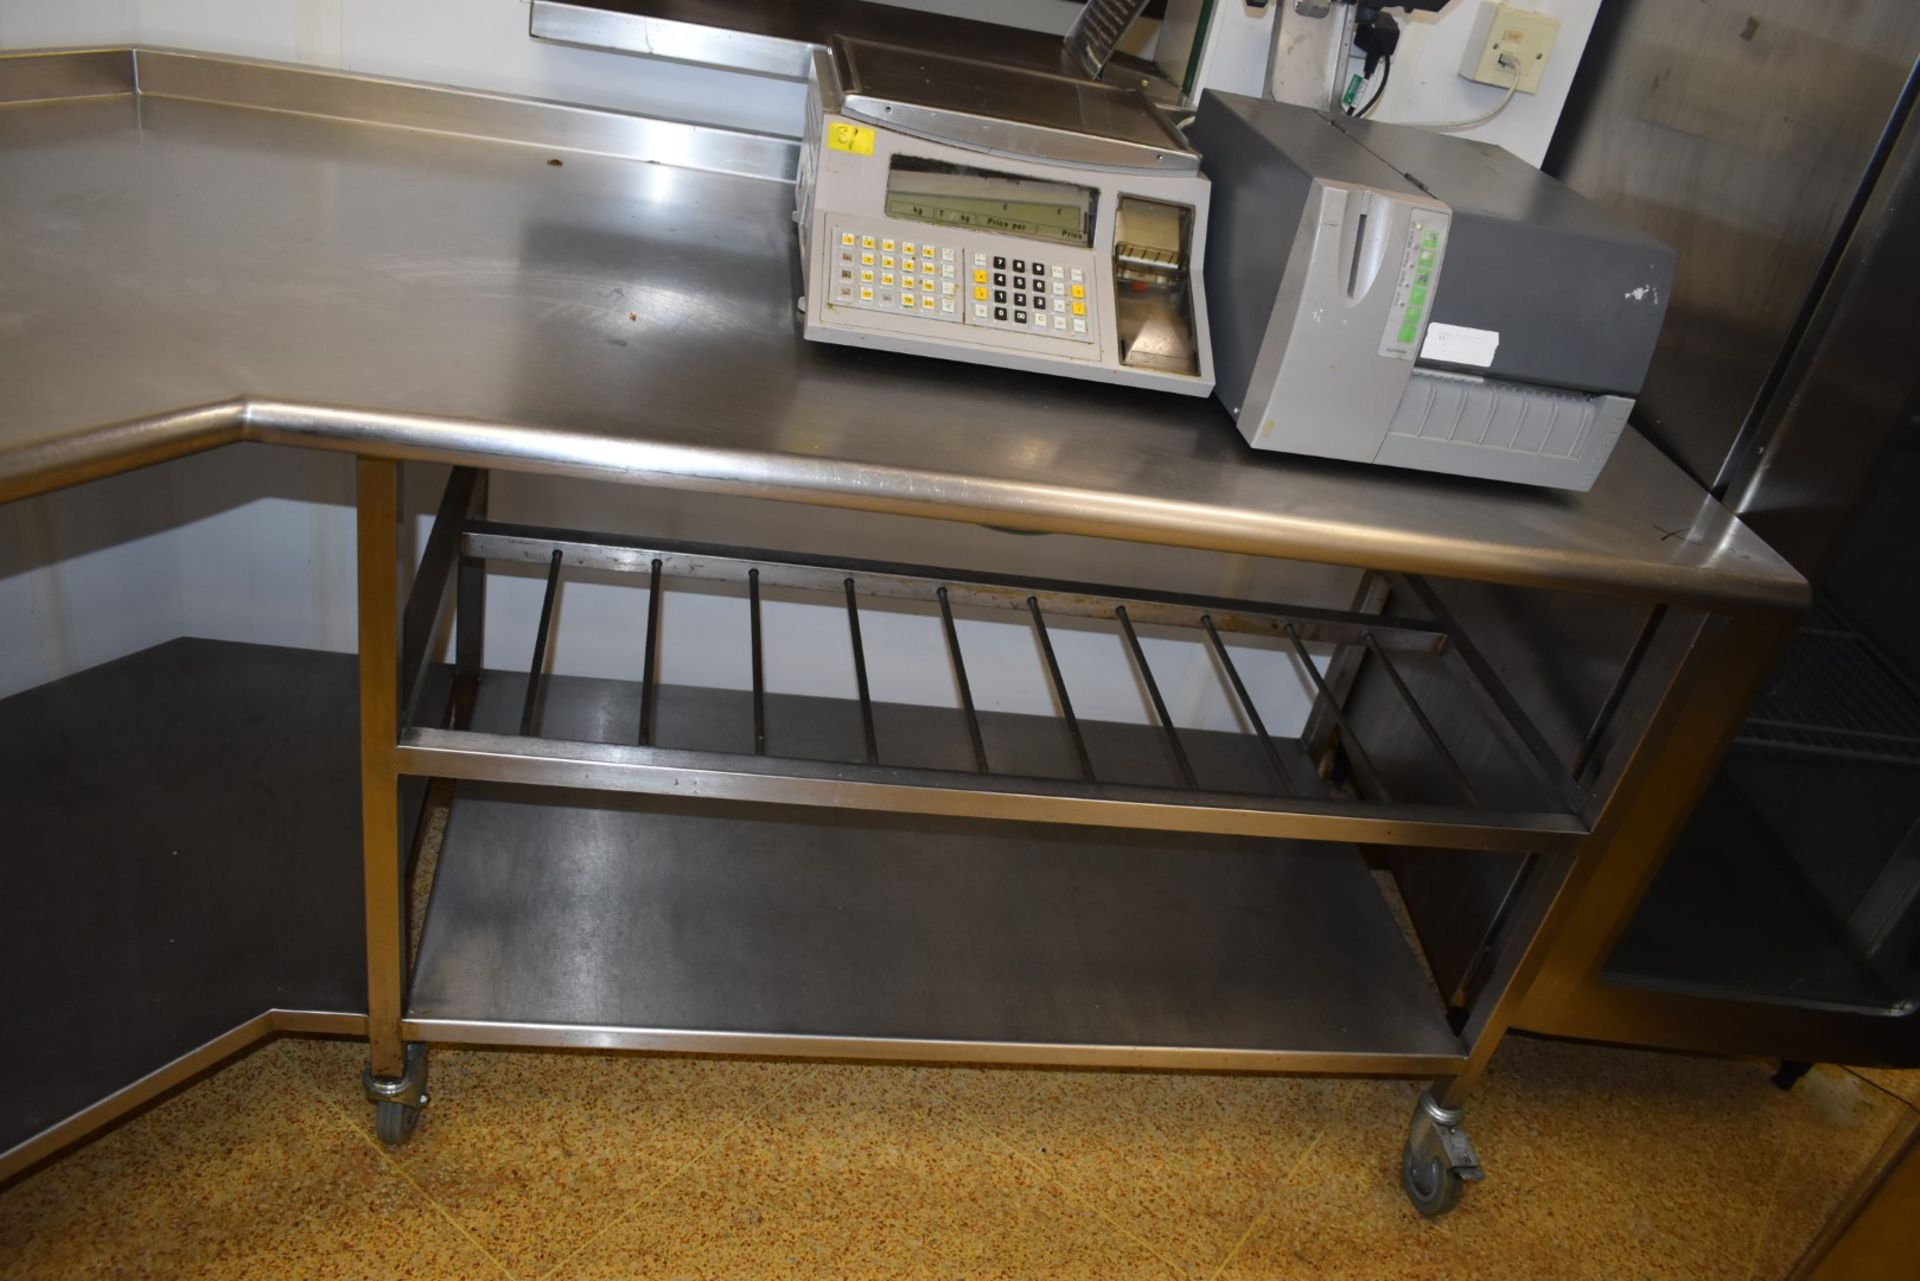 1 x Large Stainless Steel Corner Shaped Prep Table on Castors With Upstand, Undershelf, Tray Rails - Image 5 of 6